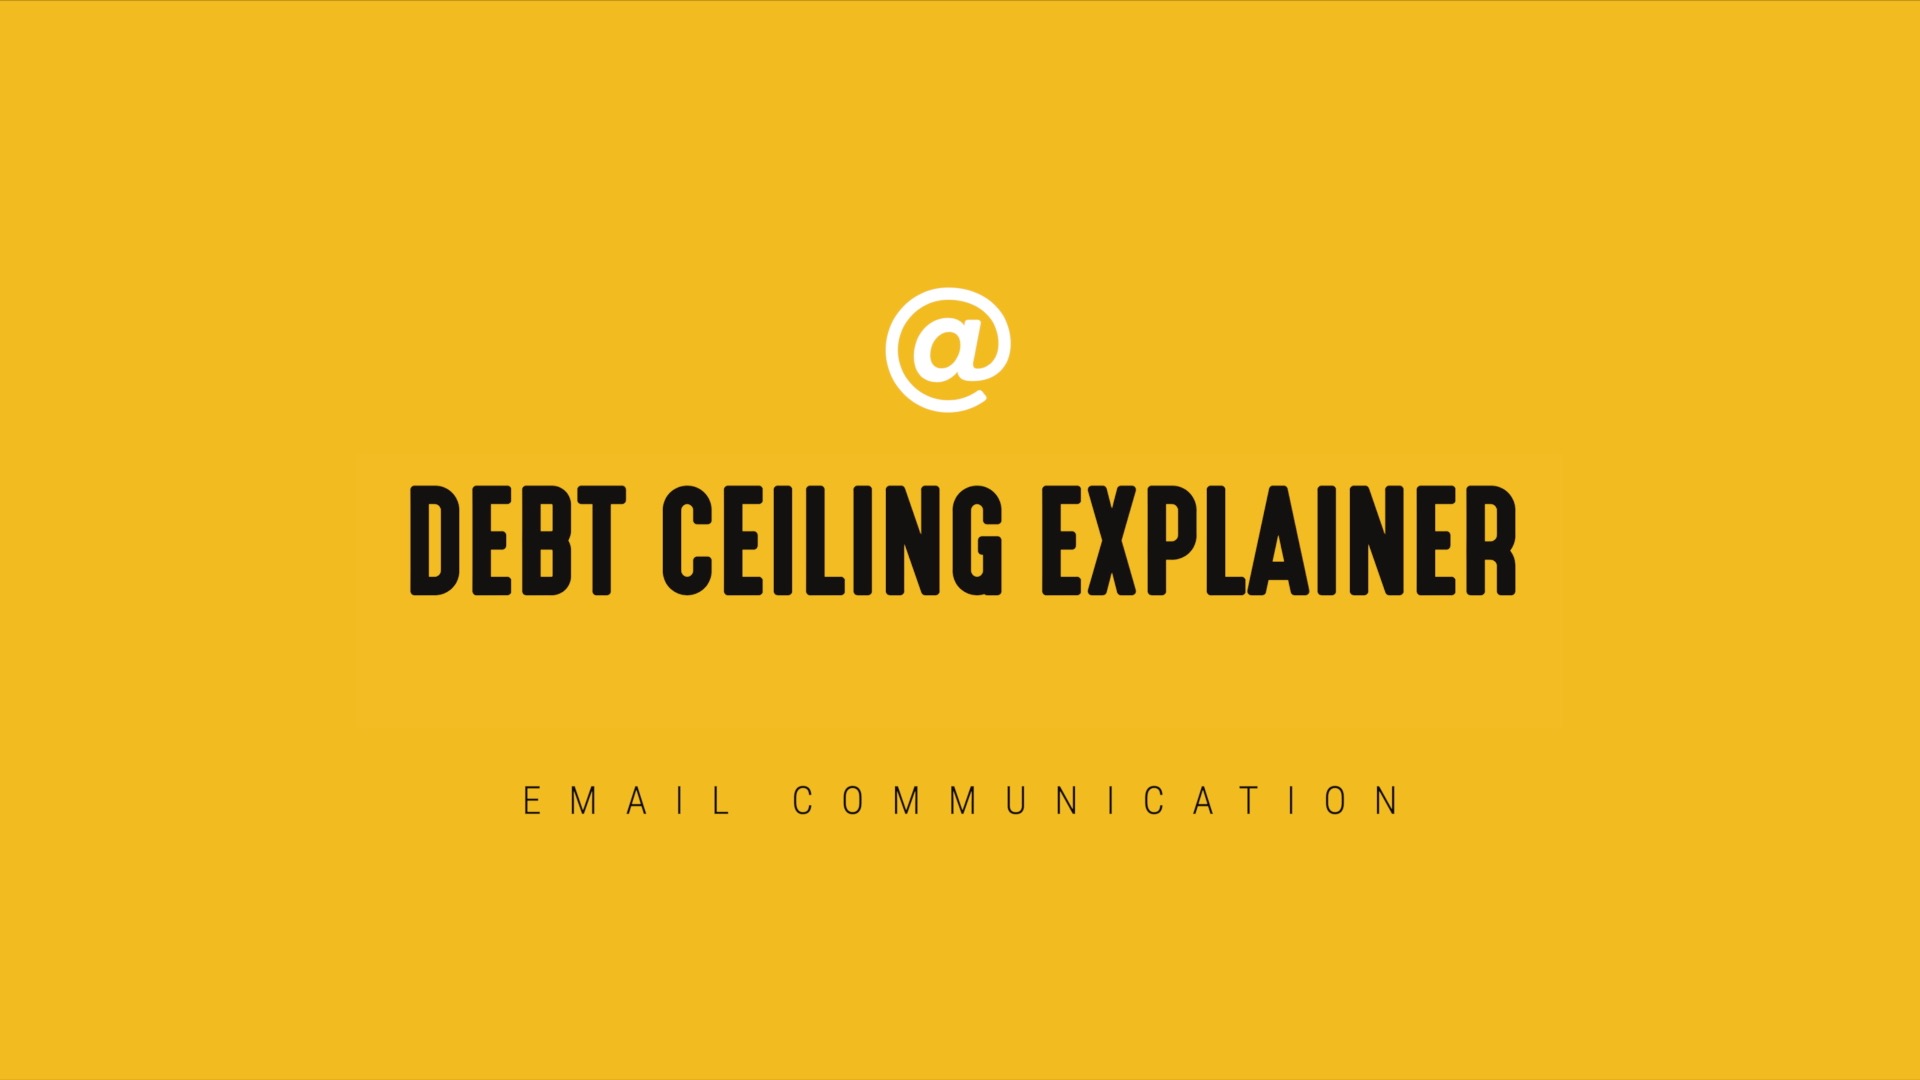 [NEW] Debt Ceiling Explainer - Single Topic Email